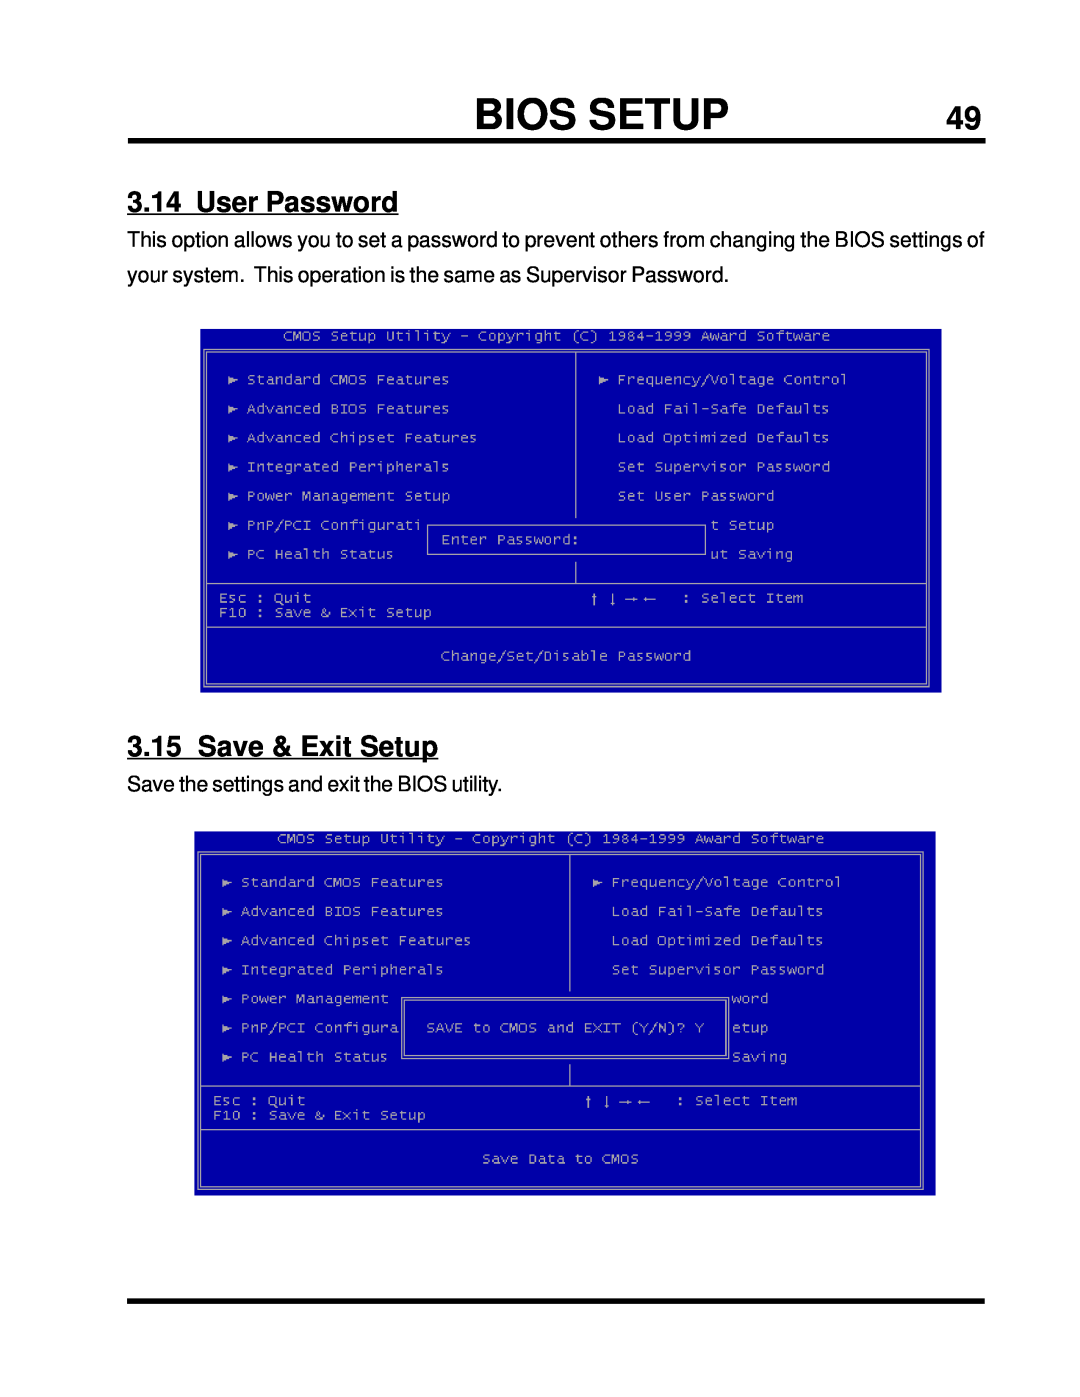 Intel TS-ASP3 user manual User Password, Save & Exit Setup, Bios Setup, Save the settings and exit the BIOS utility 